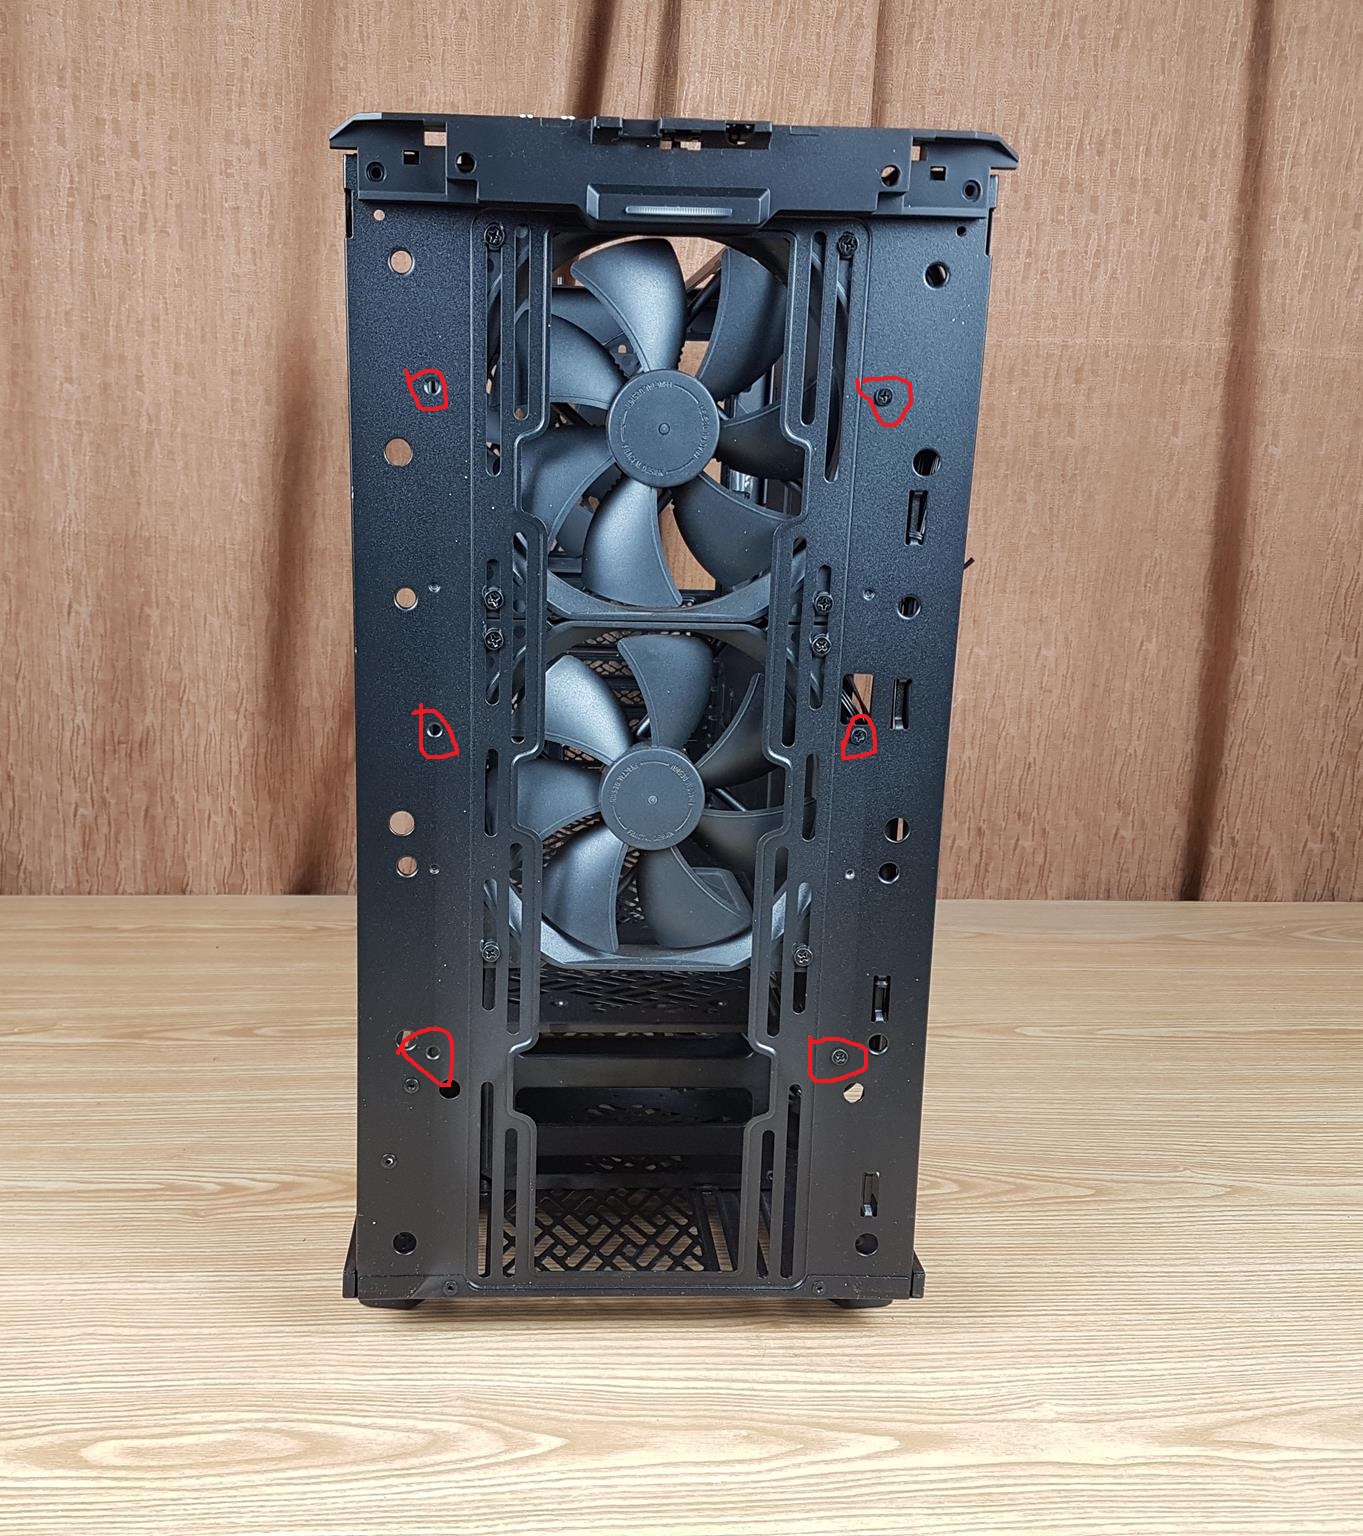 Fractal Design Meshify 2 — 6x screw mounts at the front